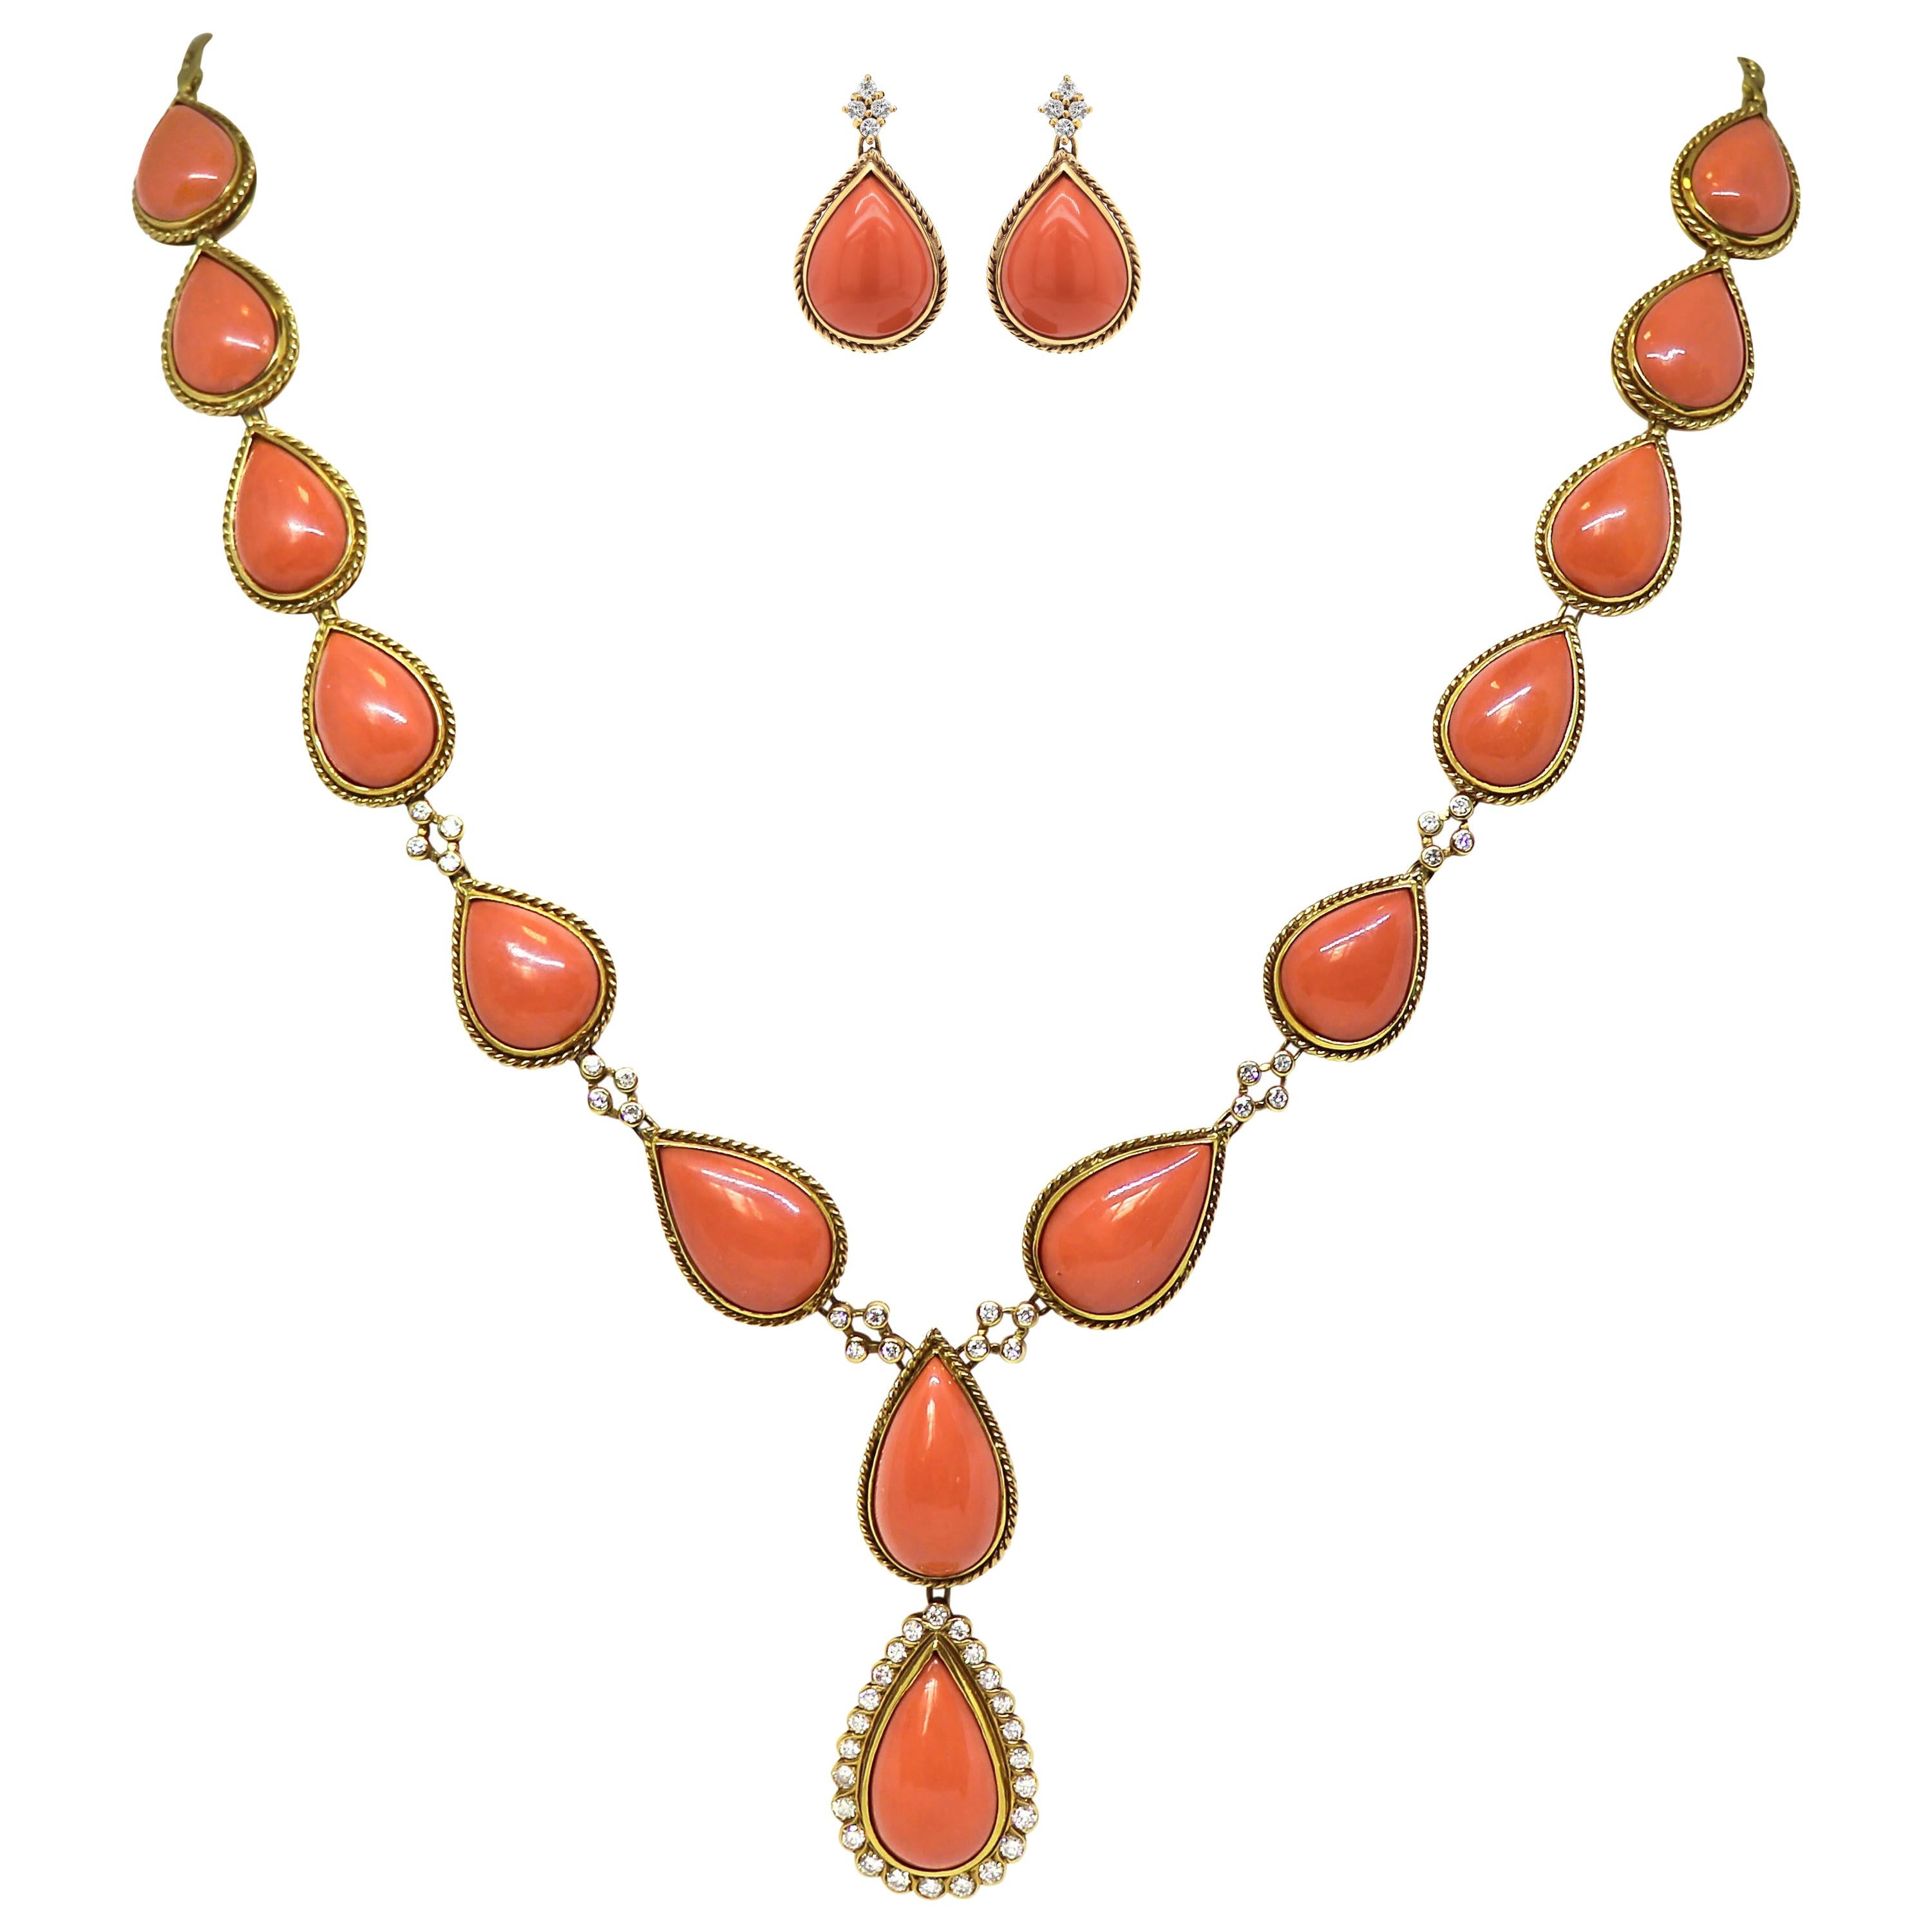 Vintage 18 Carat Yellow Gold Coral and Diamond Necklace and Earring Set